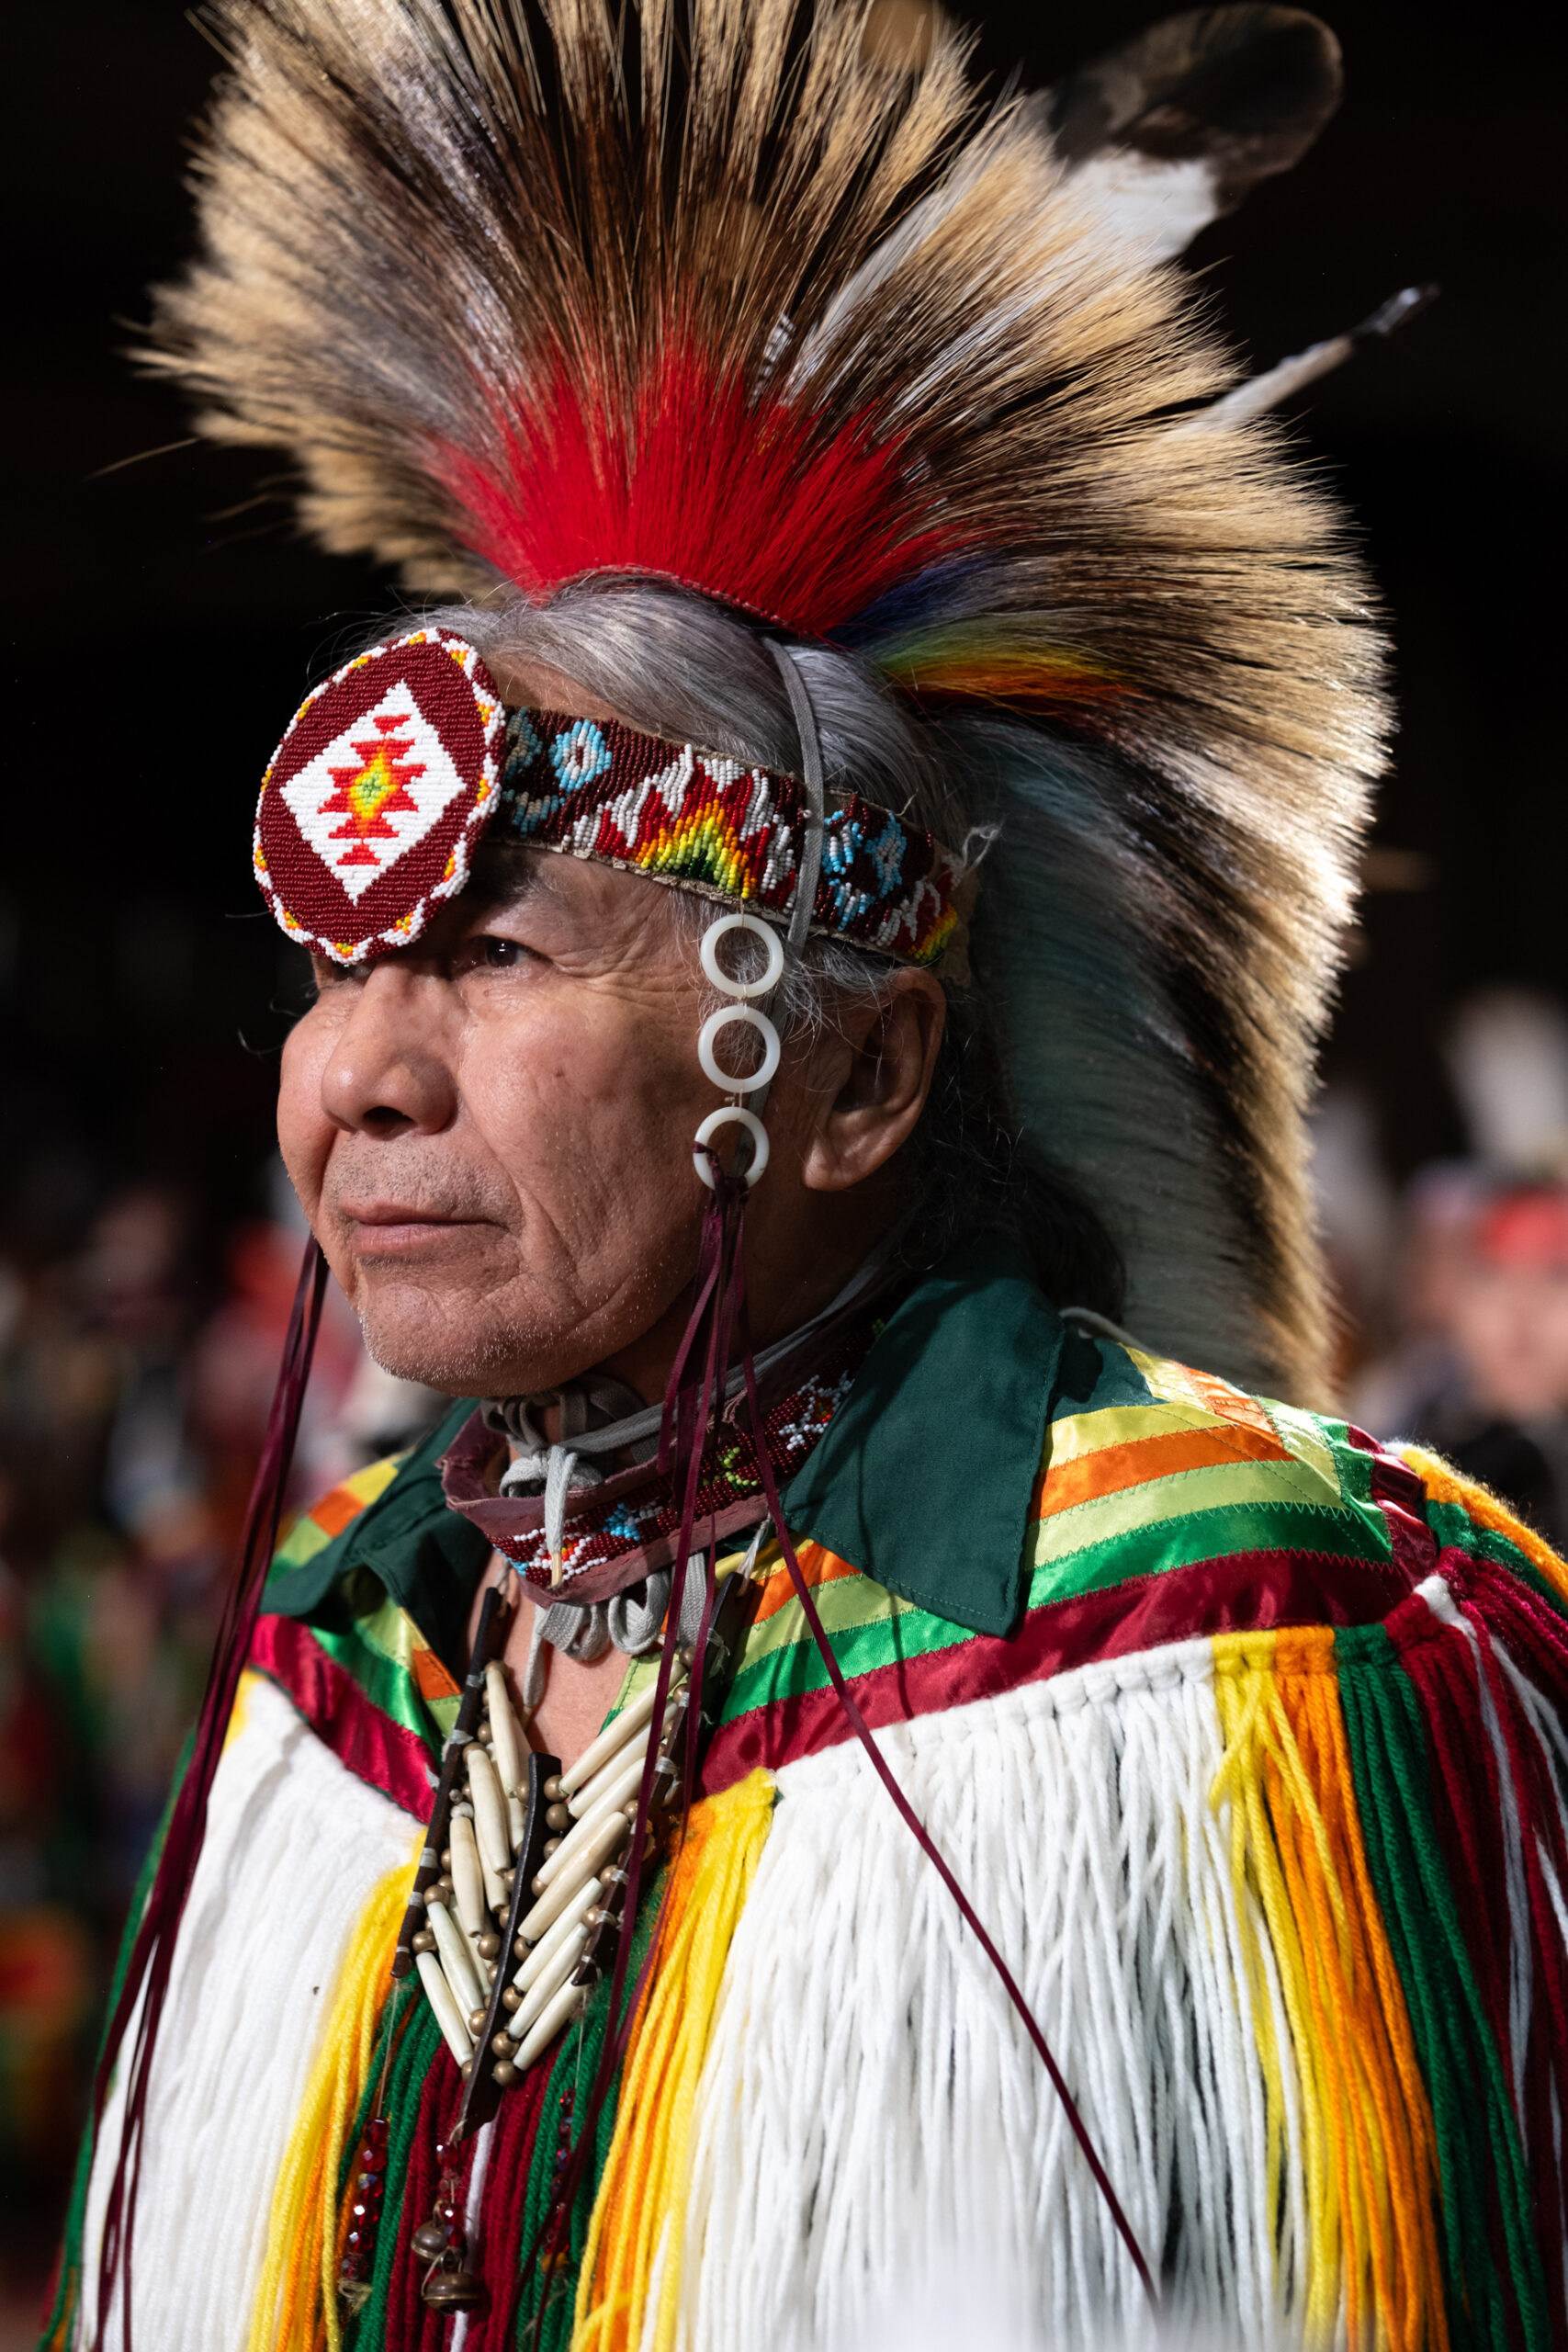 Randy Medicine Bear, dressed in full regalia, stands in with the Southern Ute Veterans Association on day one. Medicine Bear has served as an arena director for numerous powwows over the years, and calls Loveland, Colo. his home.